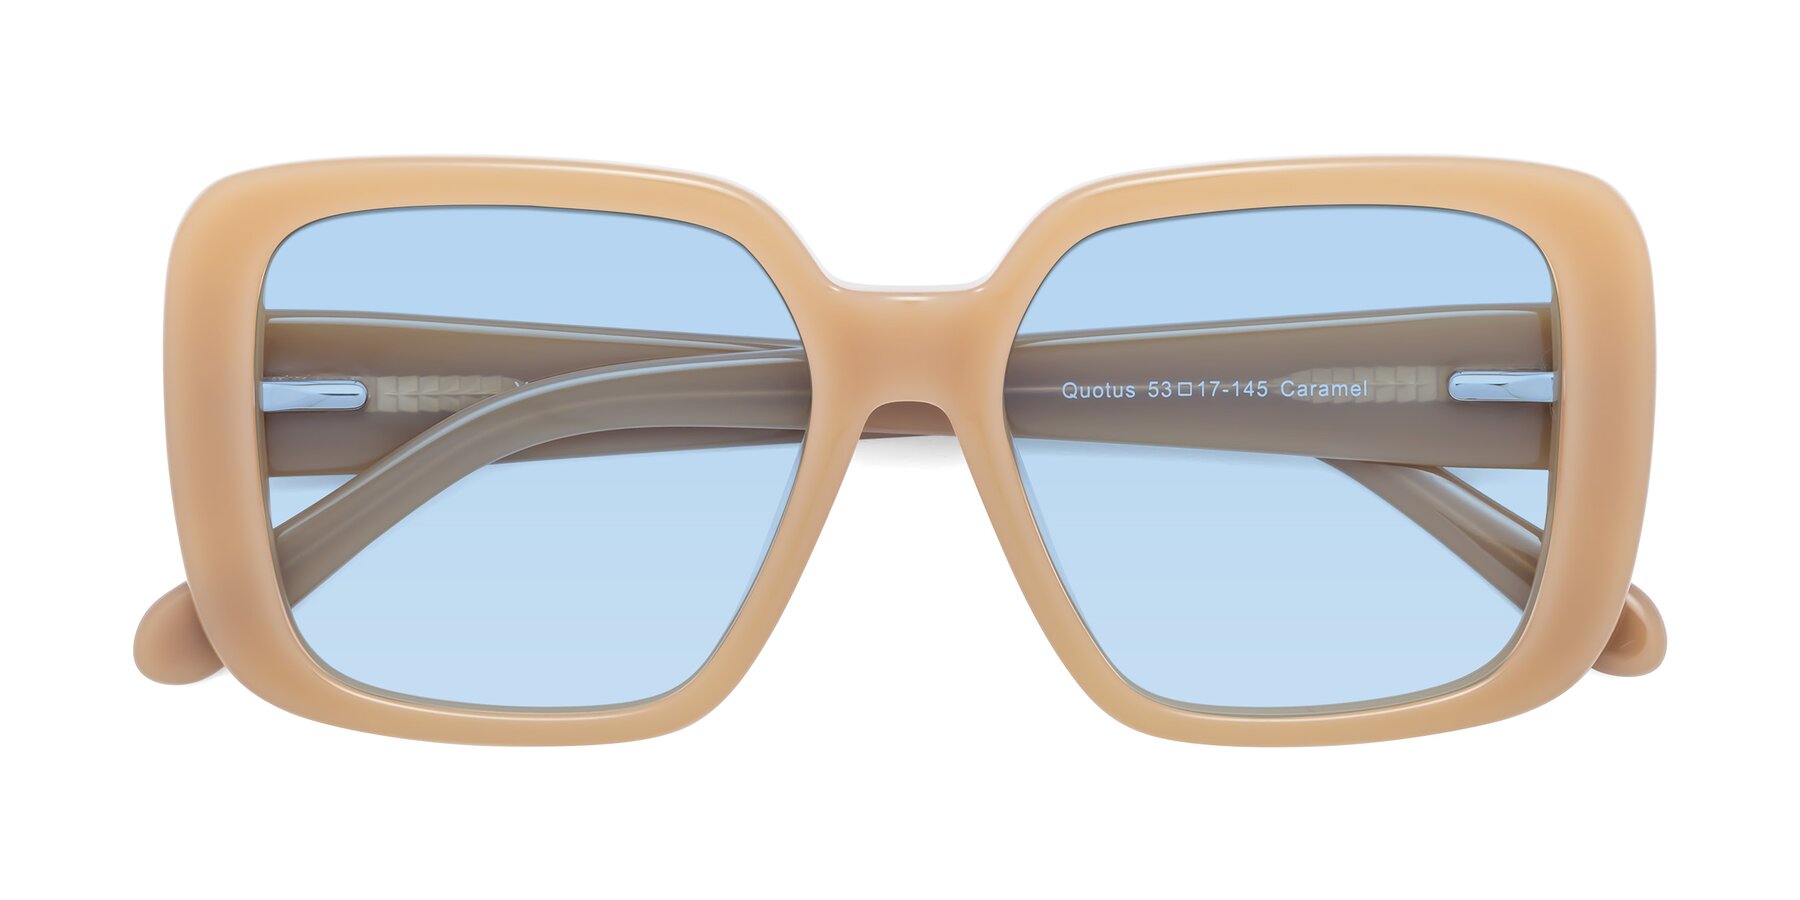 Folded Front of Quotus in Caramel with Light Blue Tinted Lenses